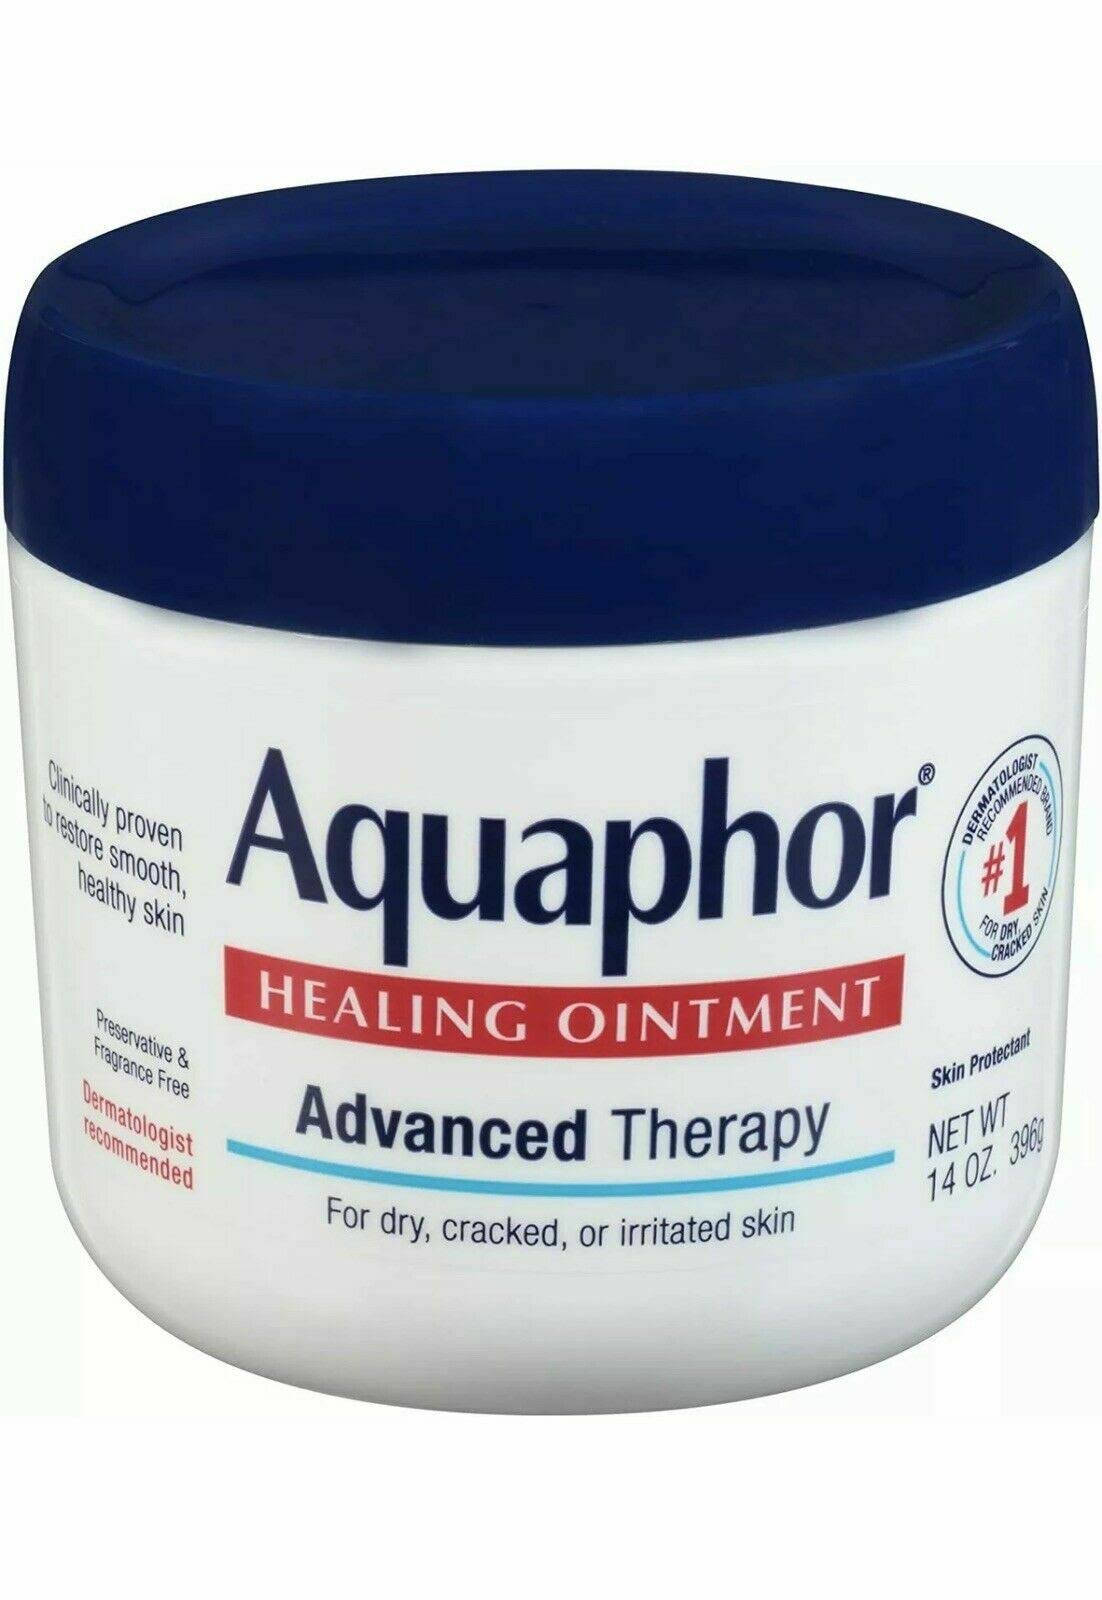 Aquaphor Advanced Therapy Healing Ointment Skin Protectant - 14oz